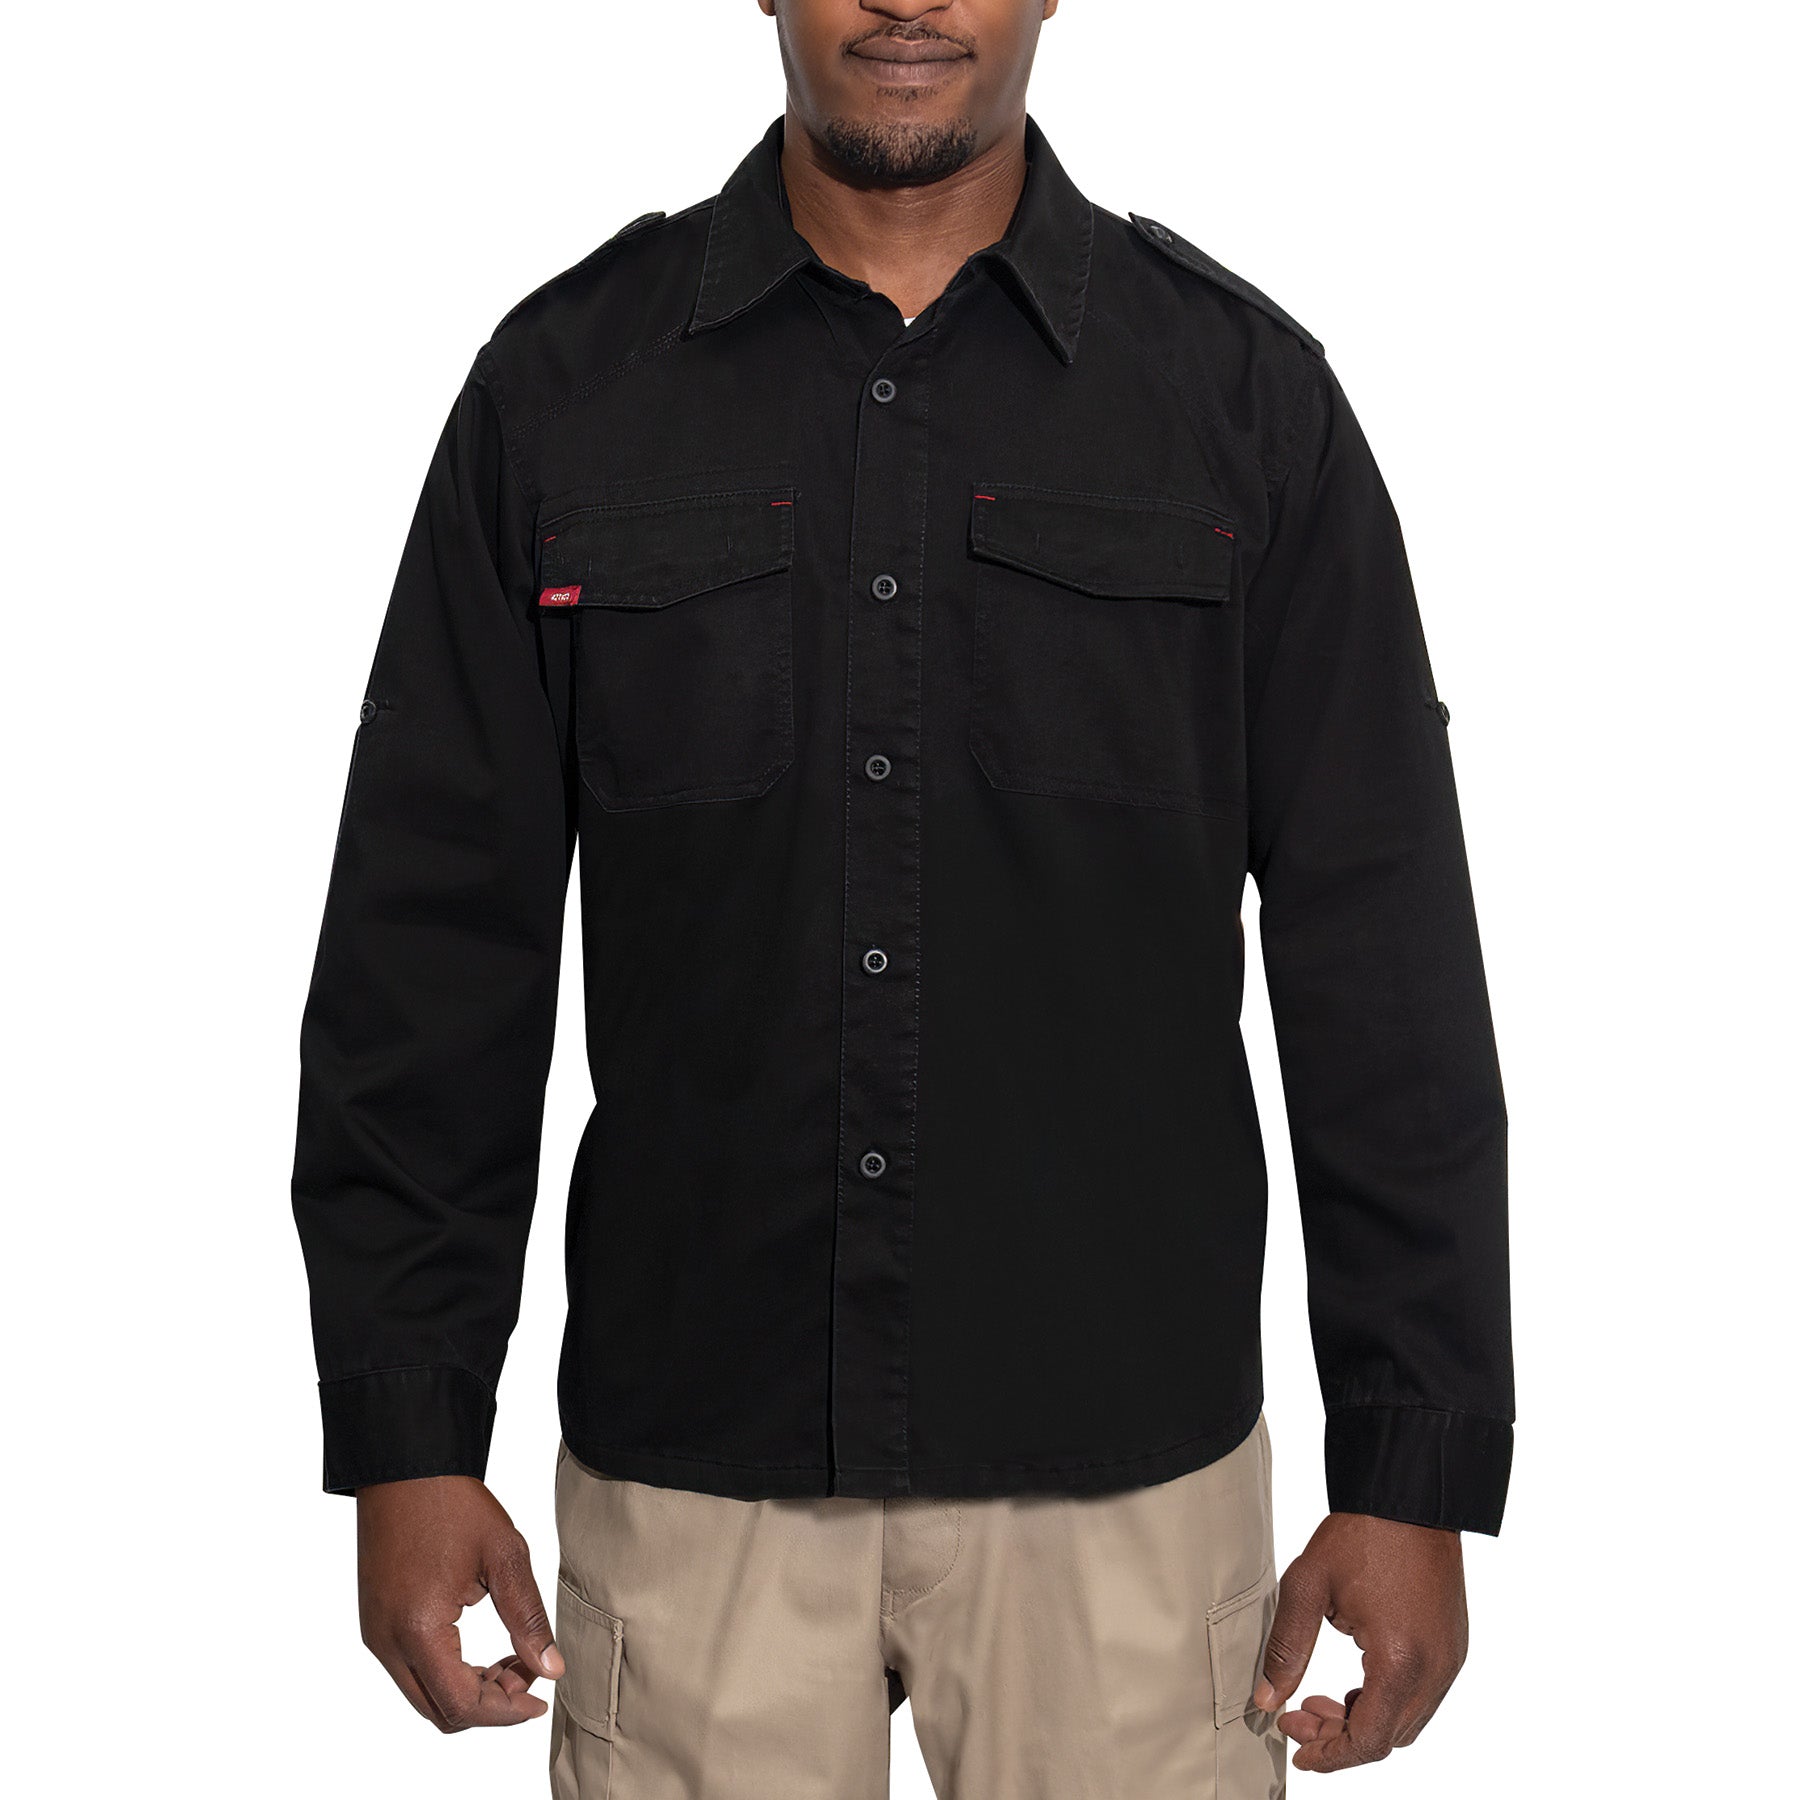 Milspec Vintage Fatigue Shirts Gifts For Him MilTac Tactical Military Outdoor Gear Australia